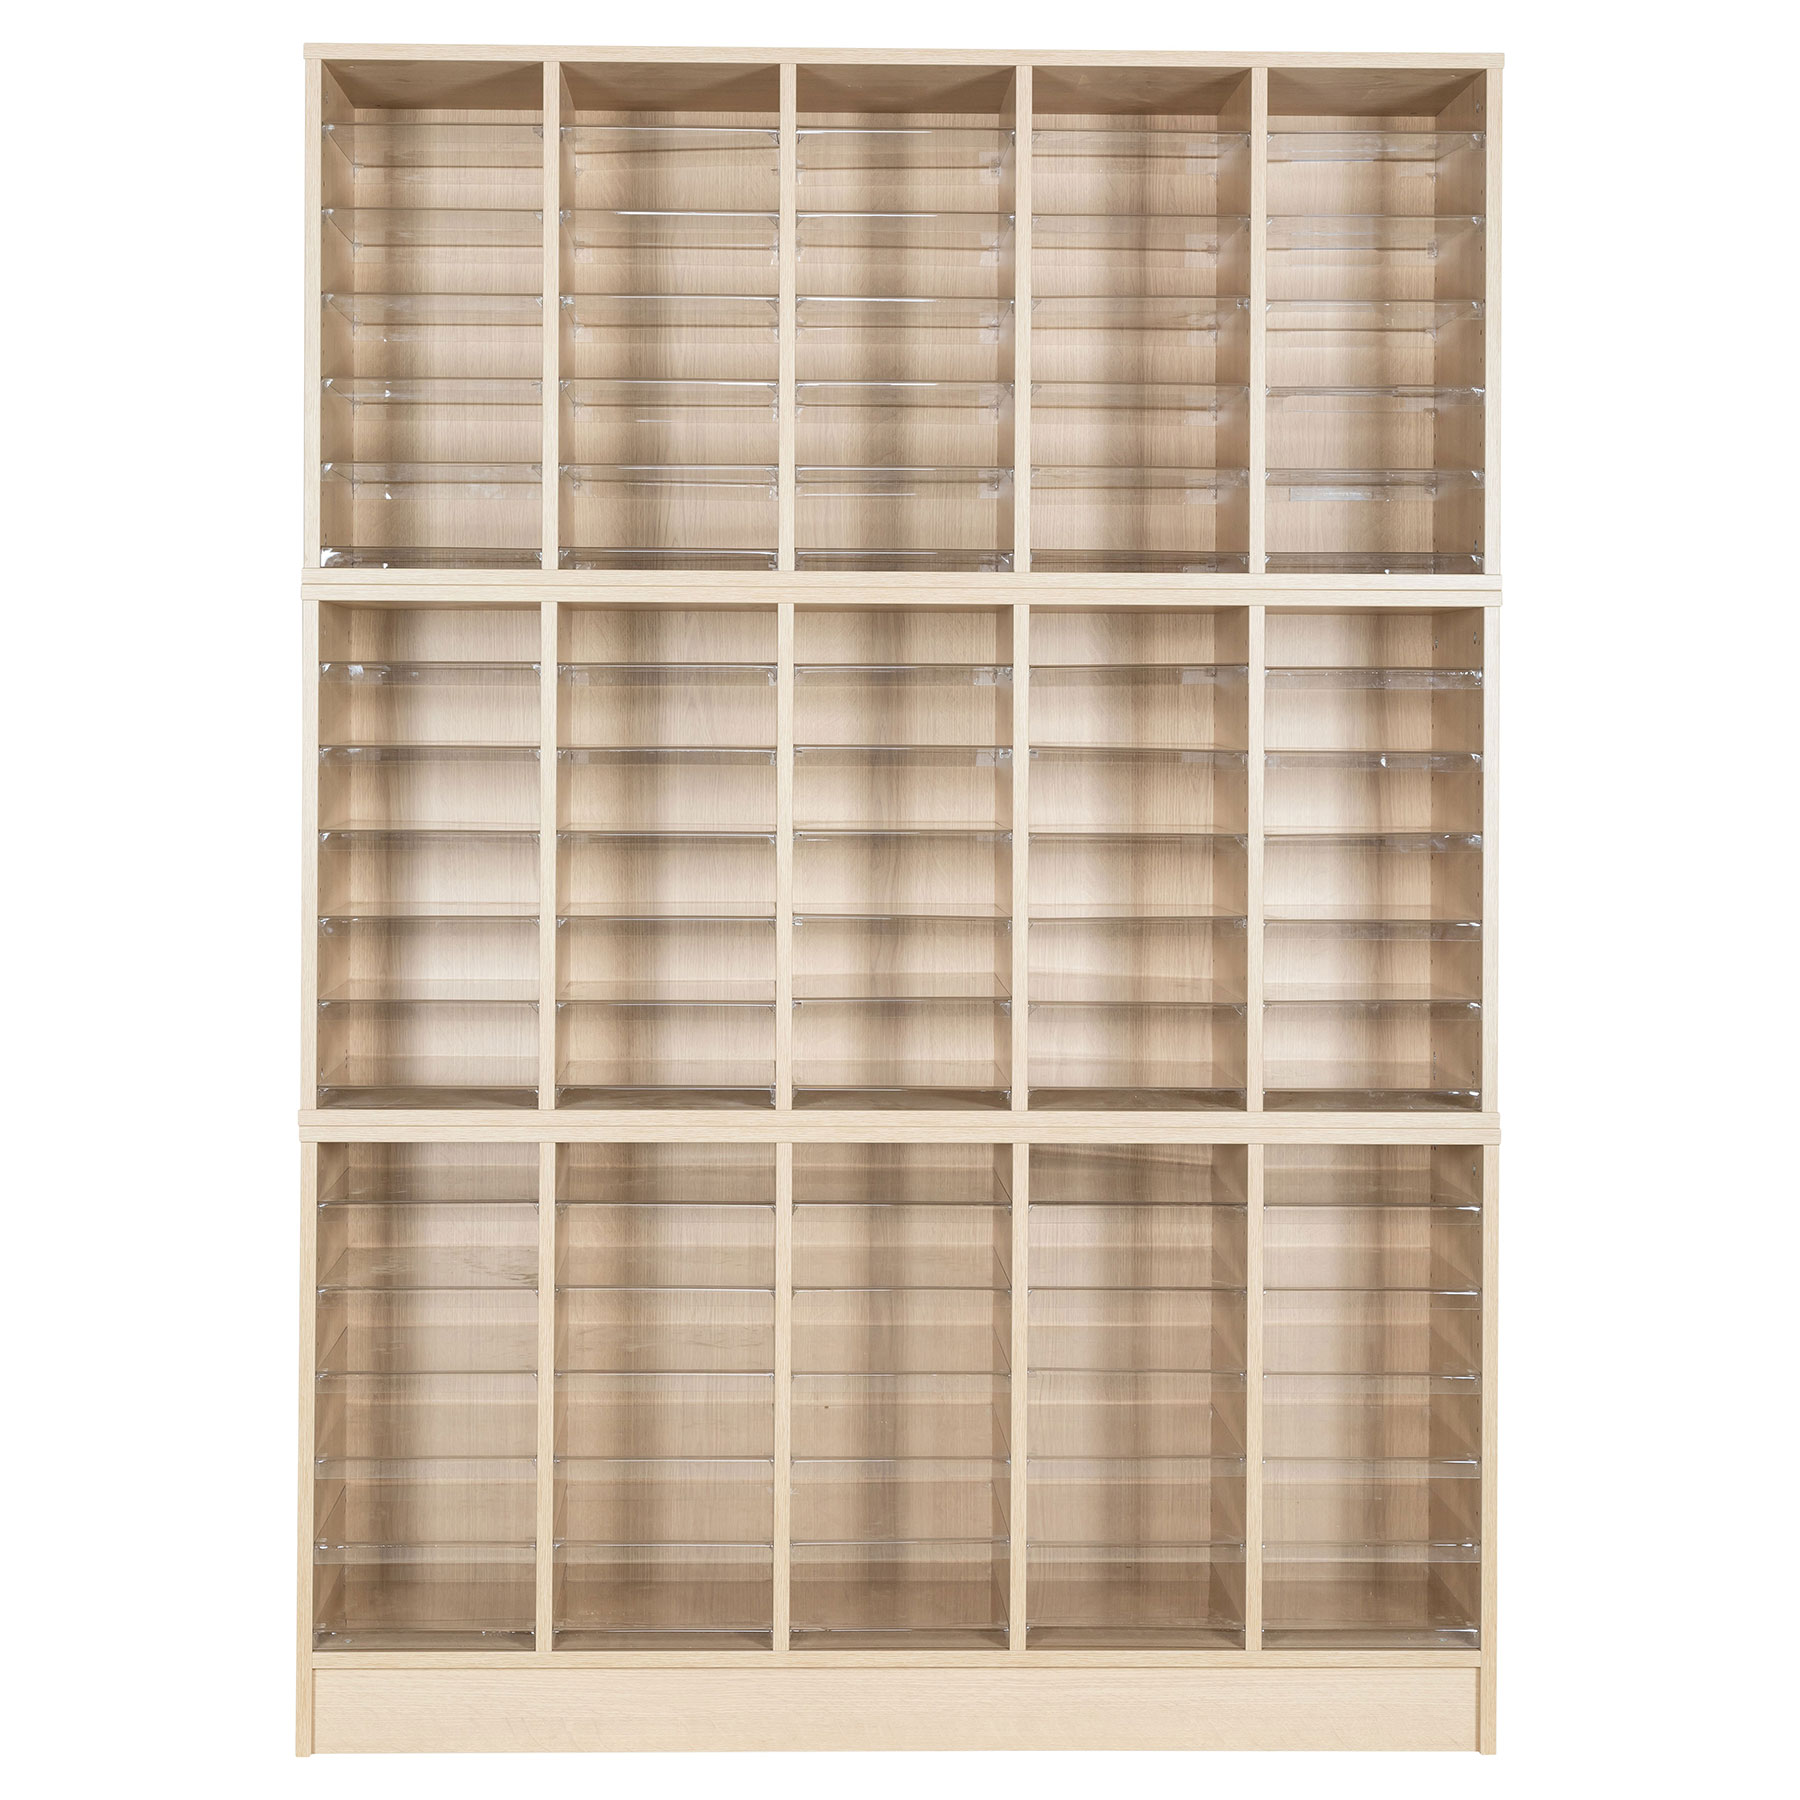 90 Compartment Pigeonhole Store